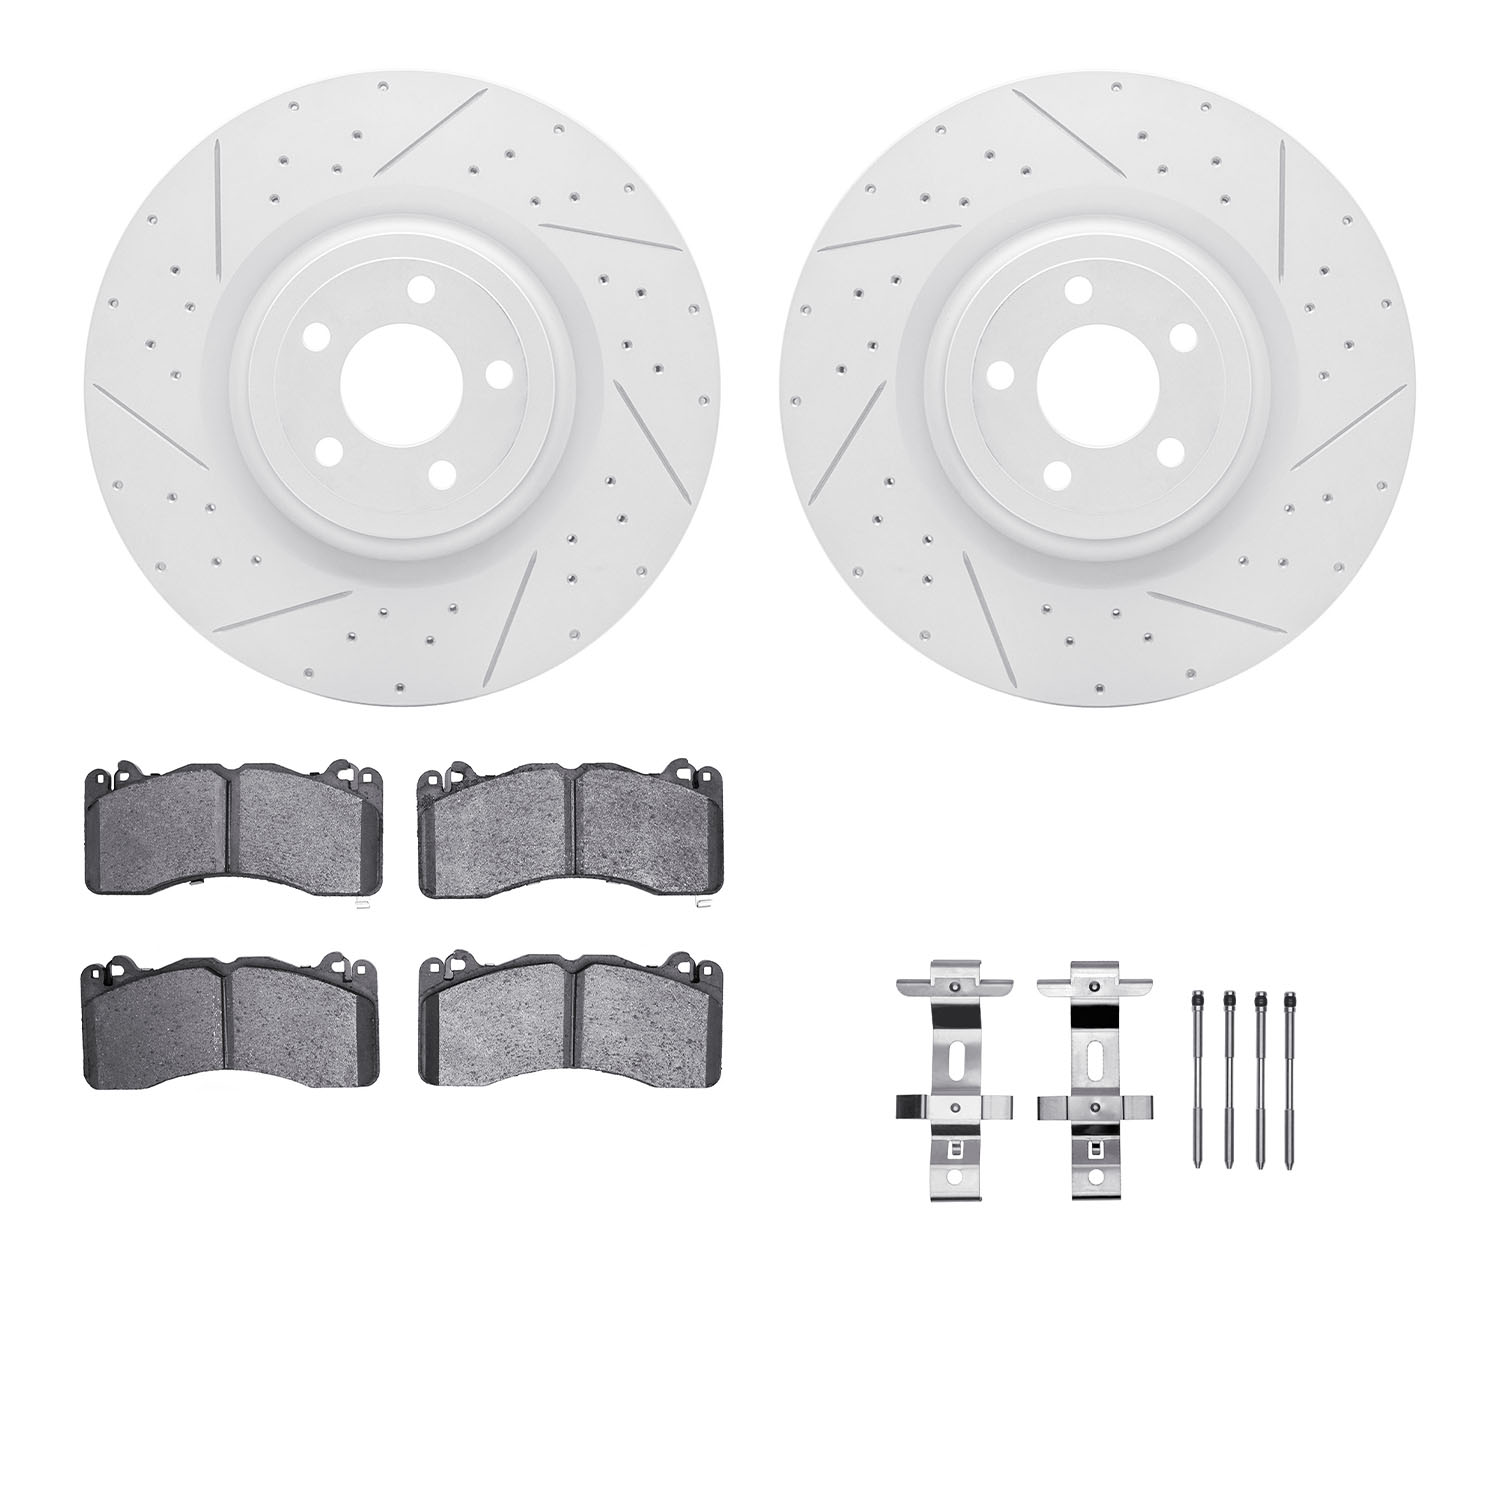 2512-54070 Geoperformance Drilled/Slotted Rotors w/5000 Advanced Brake Pads Kit & Hardware, Fits Select Ford/Lincoln/Mercury/Maz